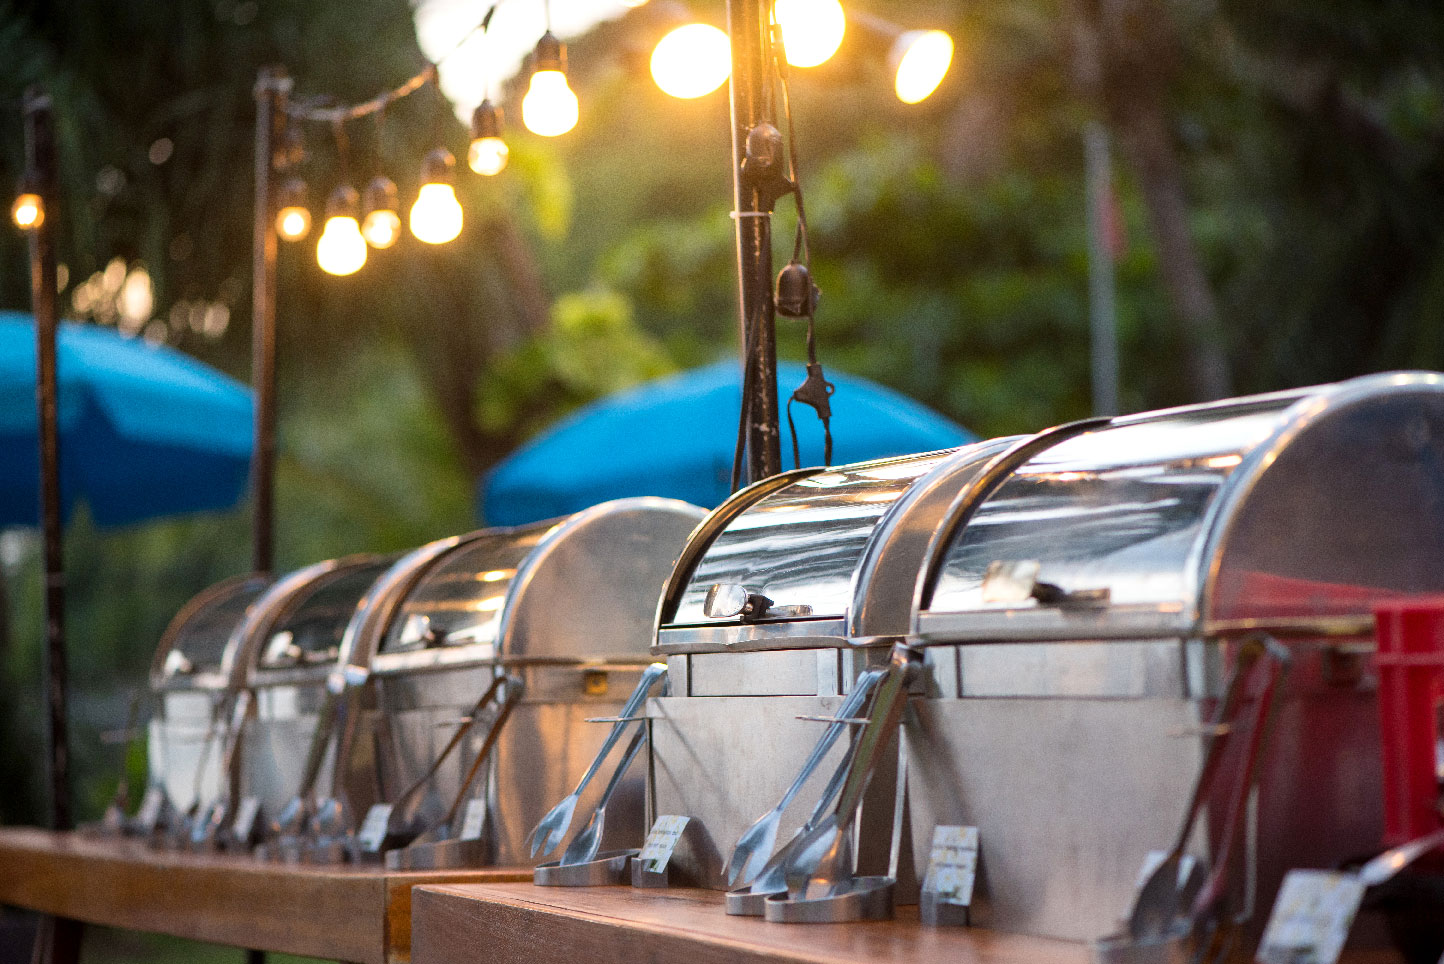 Cooking Equipment Rentals  A&B Party and Tent Rental